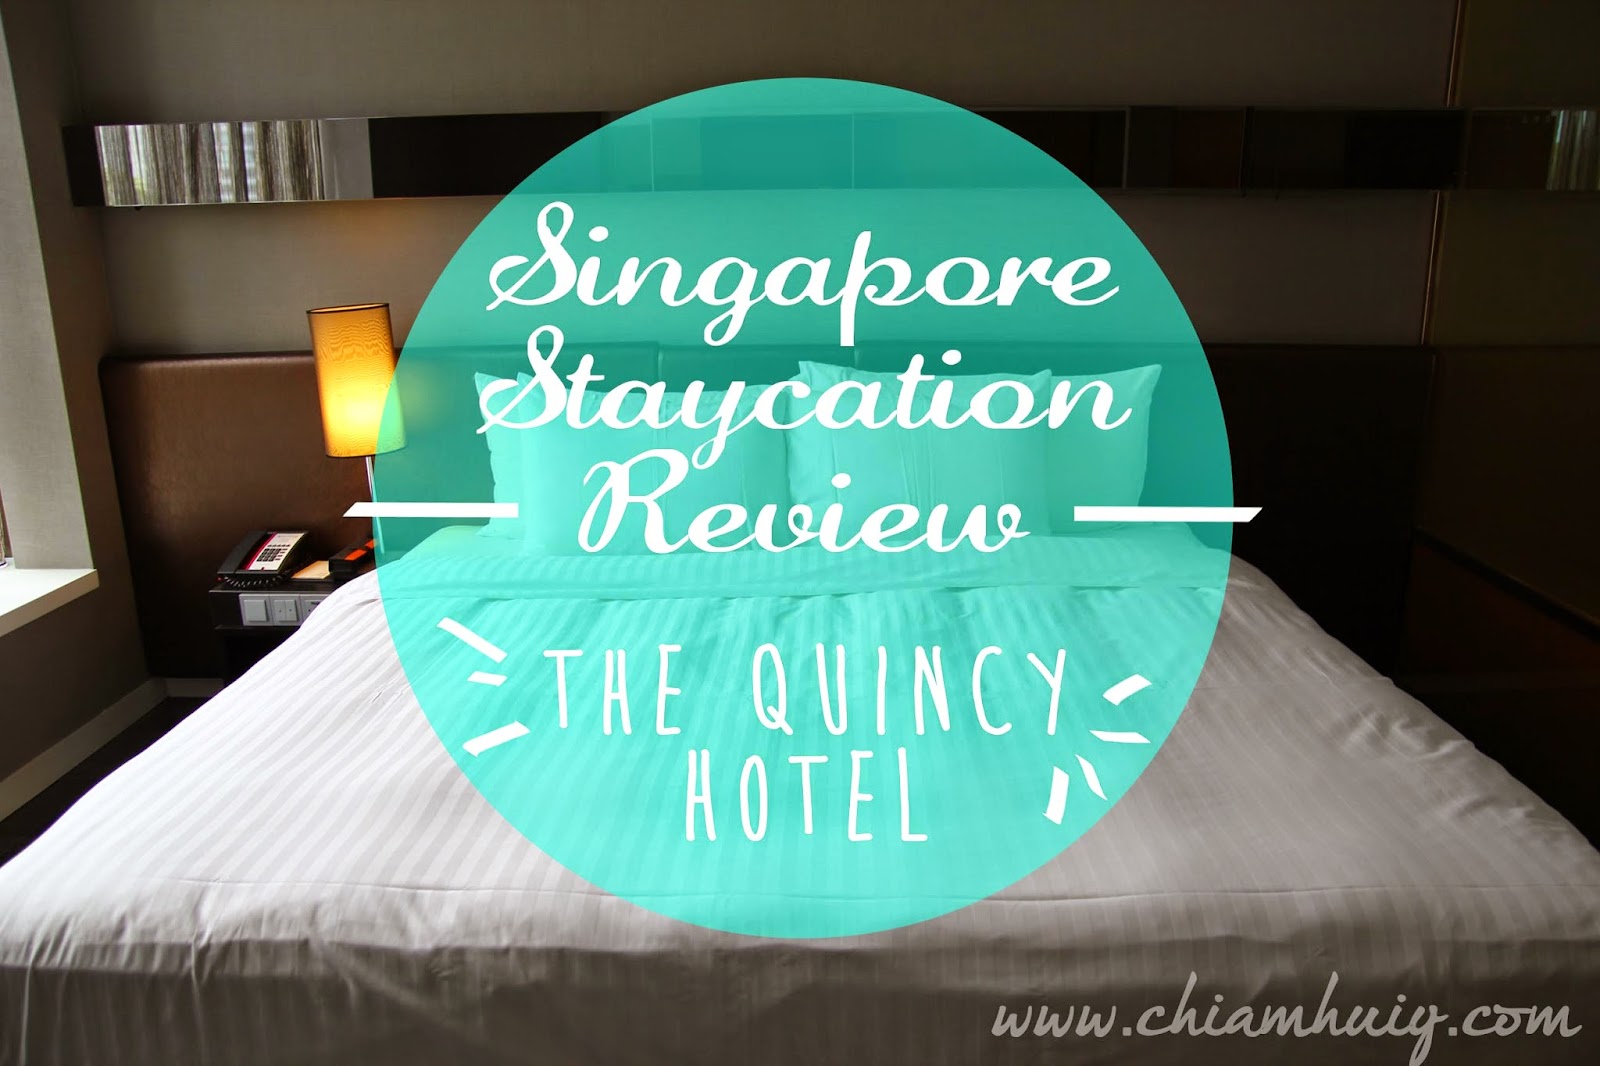 Singapore%2BStaycation%2Breview%2Bblog